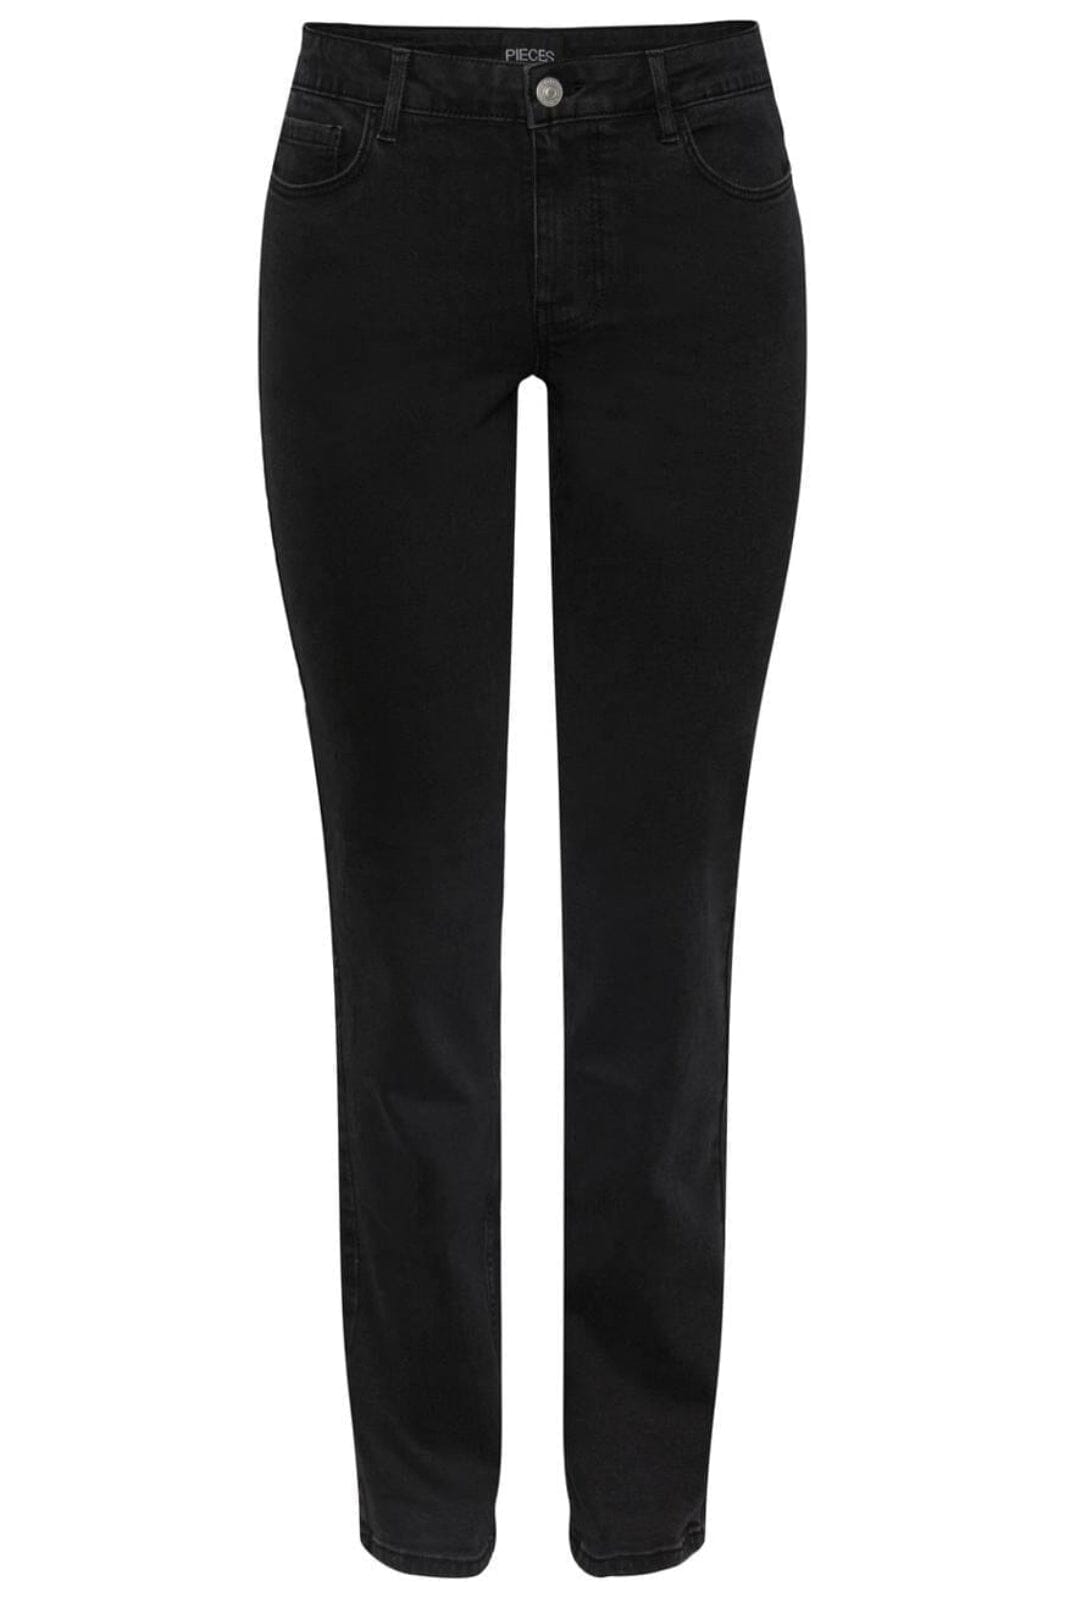 Pieces - Pckesia Straight Blc Jeans Cp - 4328397 Black Jeans 